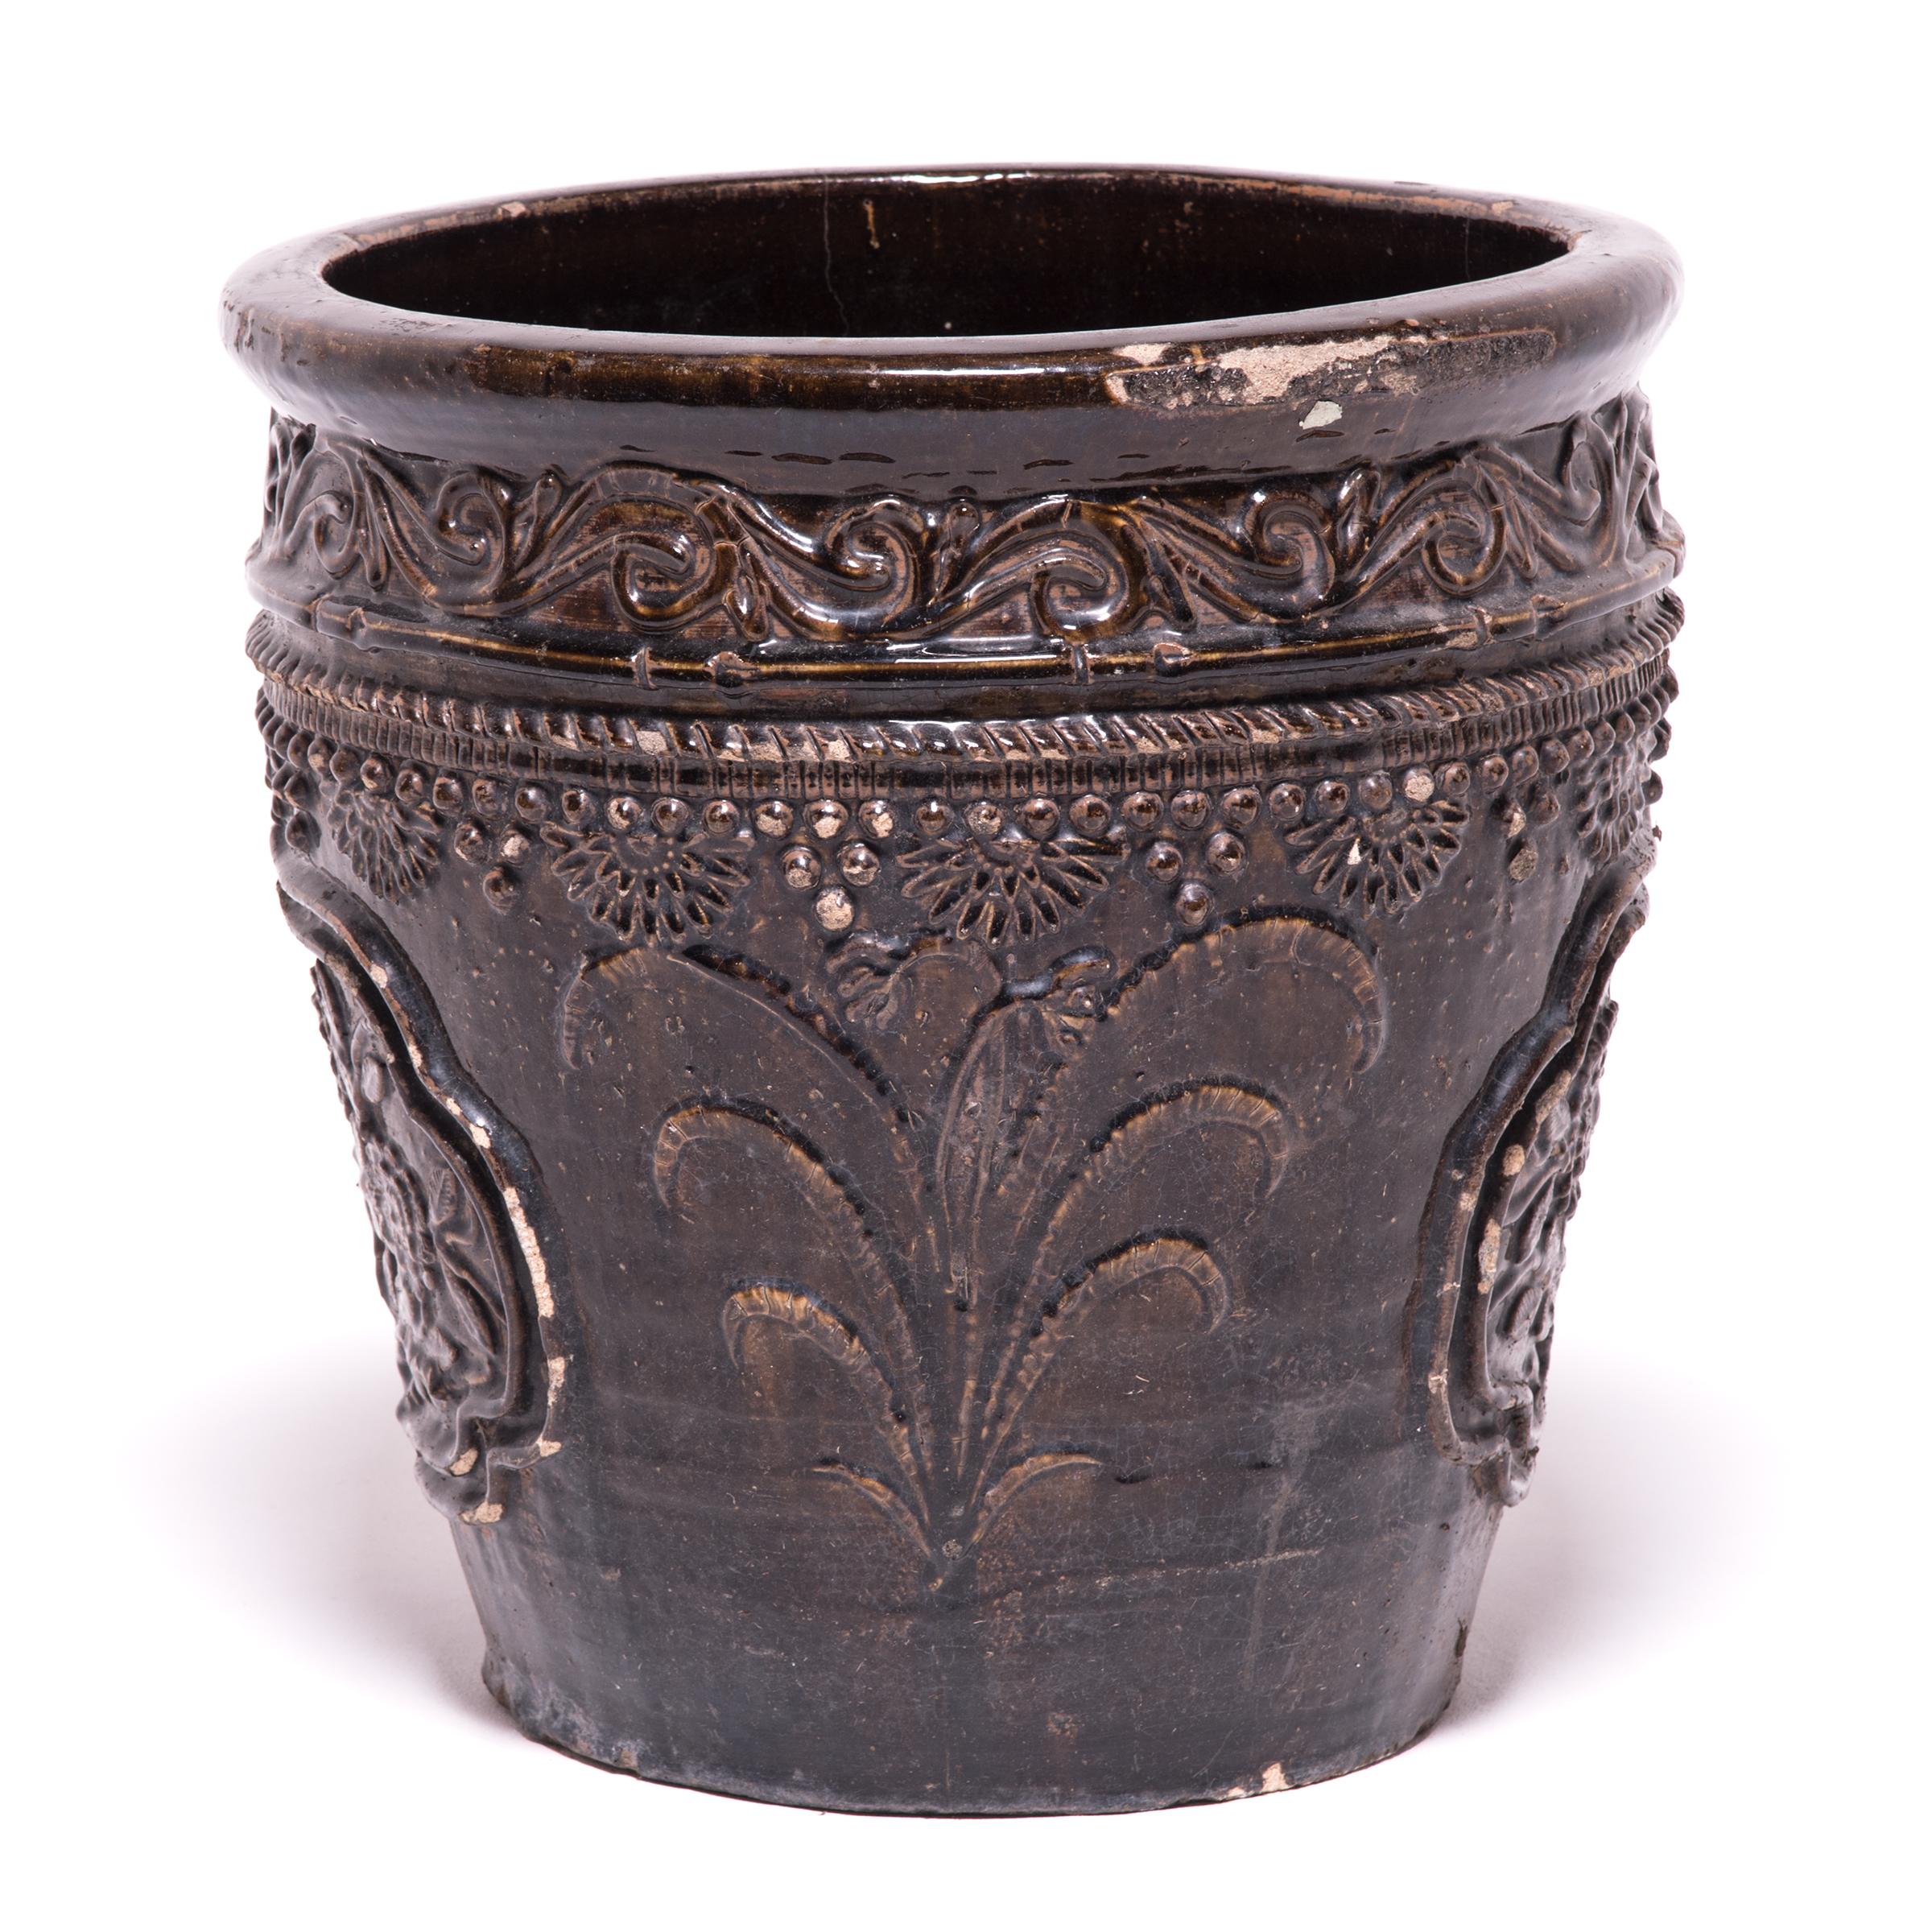 Rendered in high relief, this ceramic jar’s dimensional bands, hobnail motifs and flower-filled medallions add visual interest and texture to its rich brown glaze. Decorated with chrysanthemums, a symbol of longevity, the jar embodies this promise,